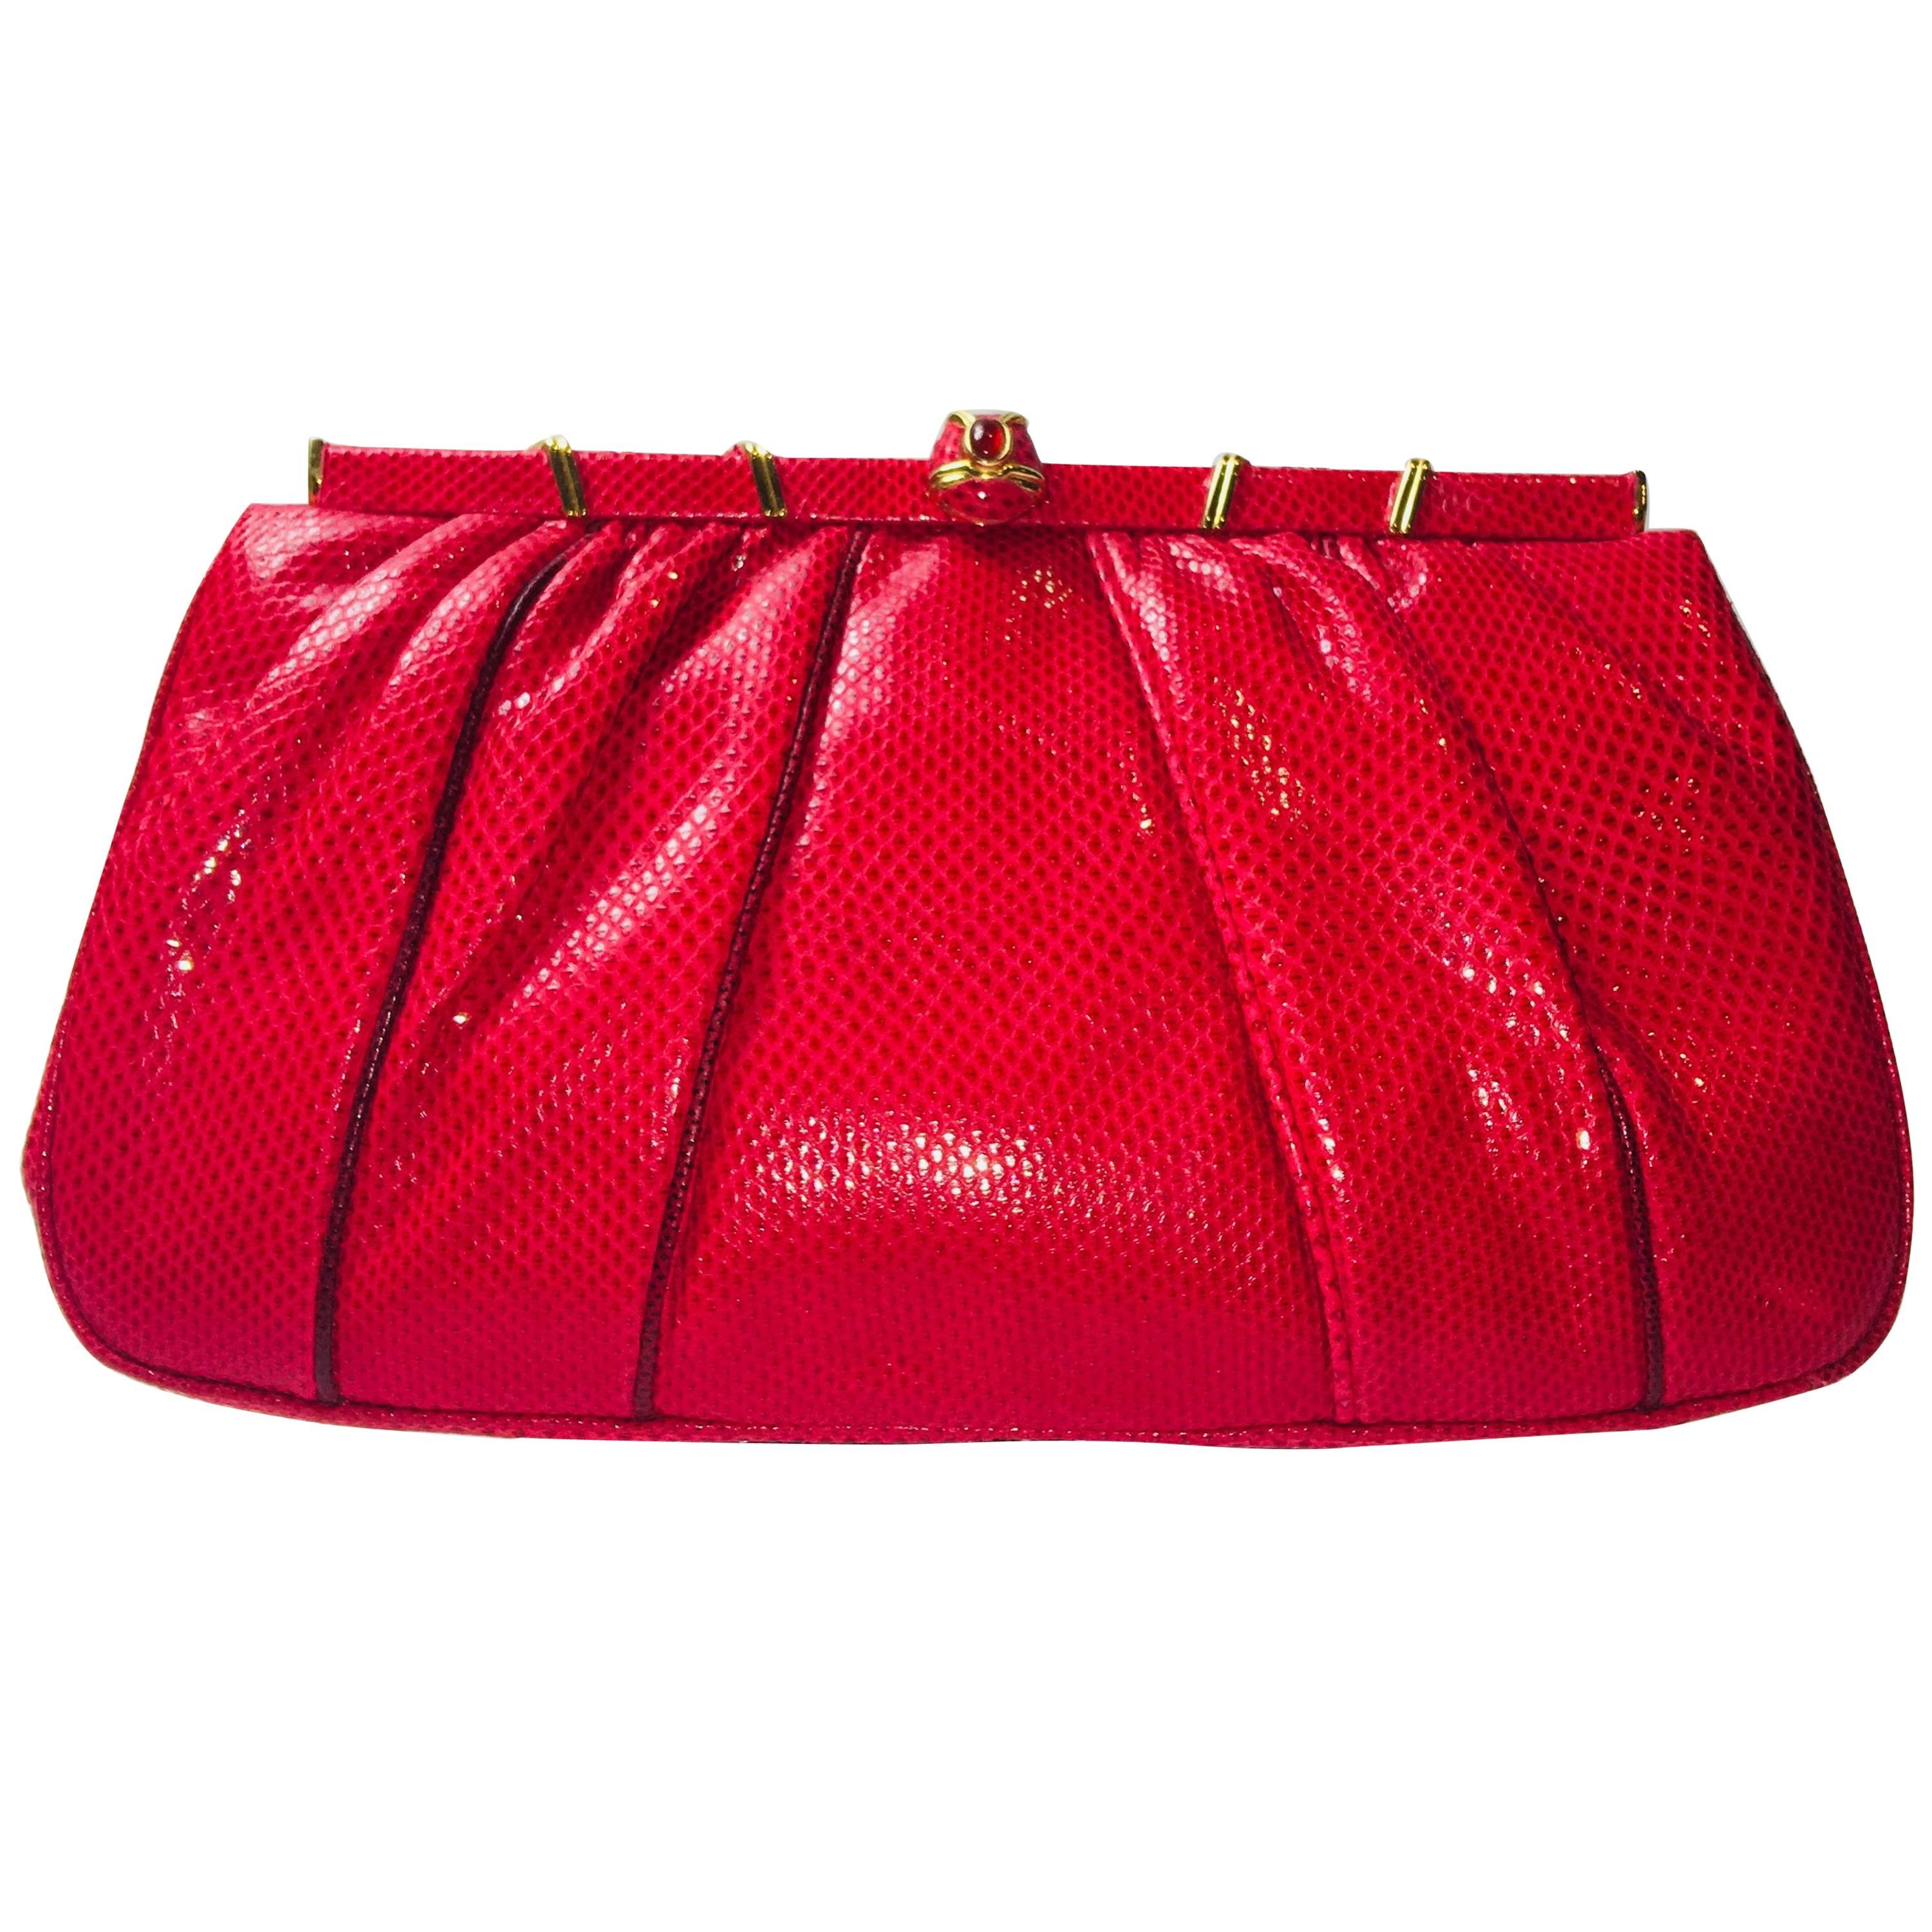 Judith Leiber Red Leather Clutch